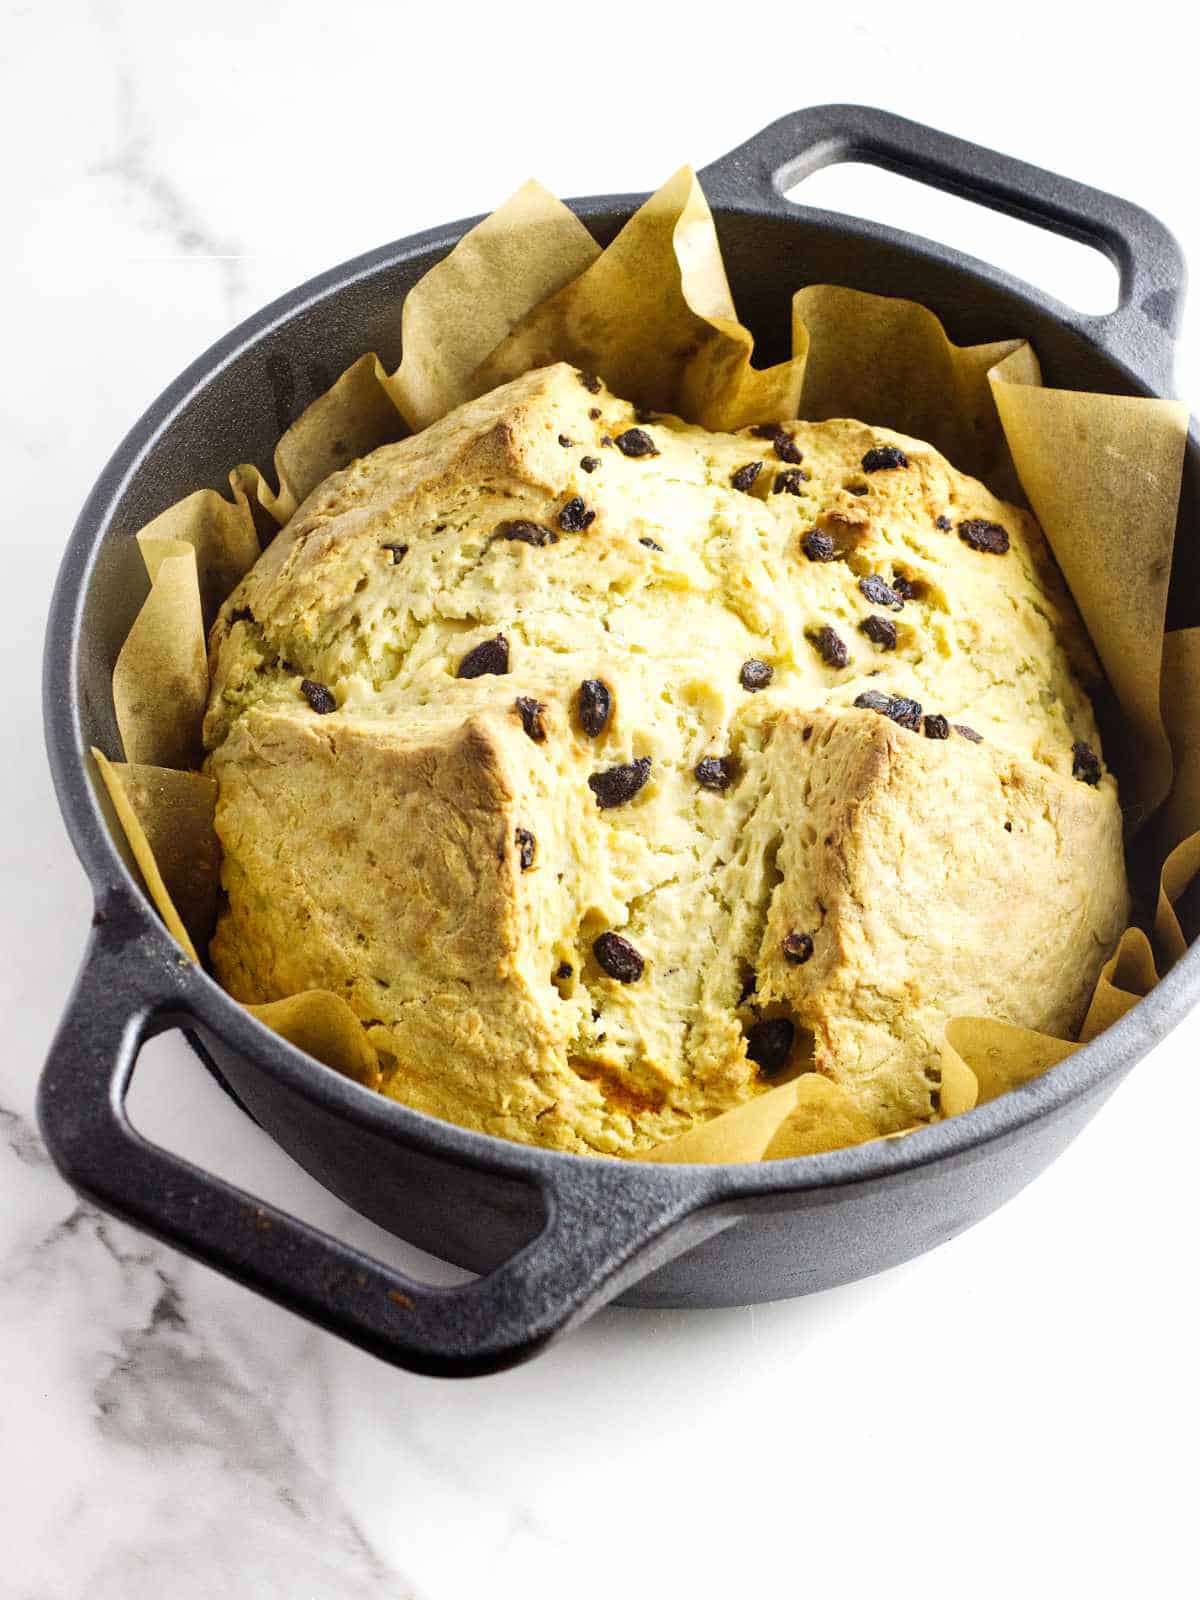 Soda bread with raisins in a cast iron Dutch oven, freshly baked.